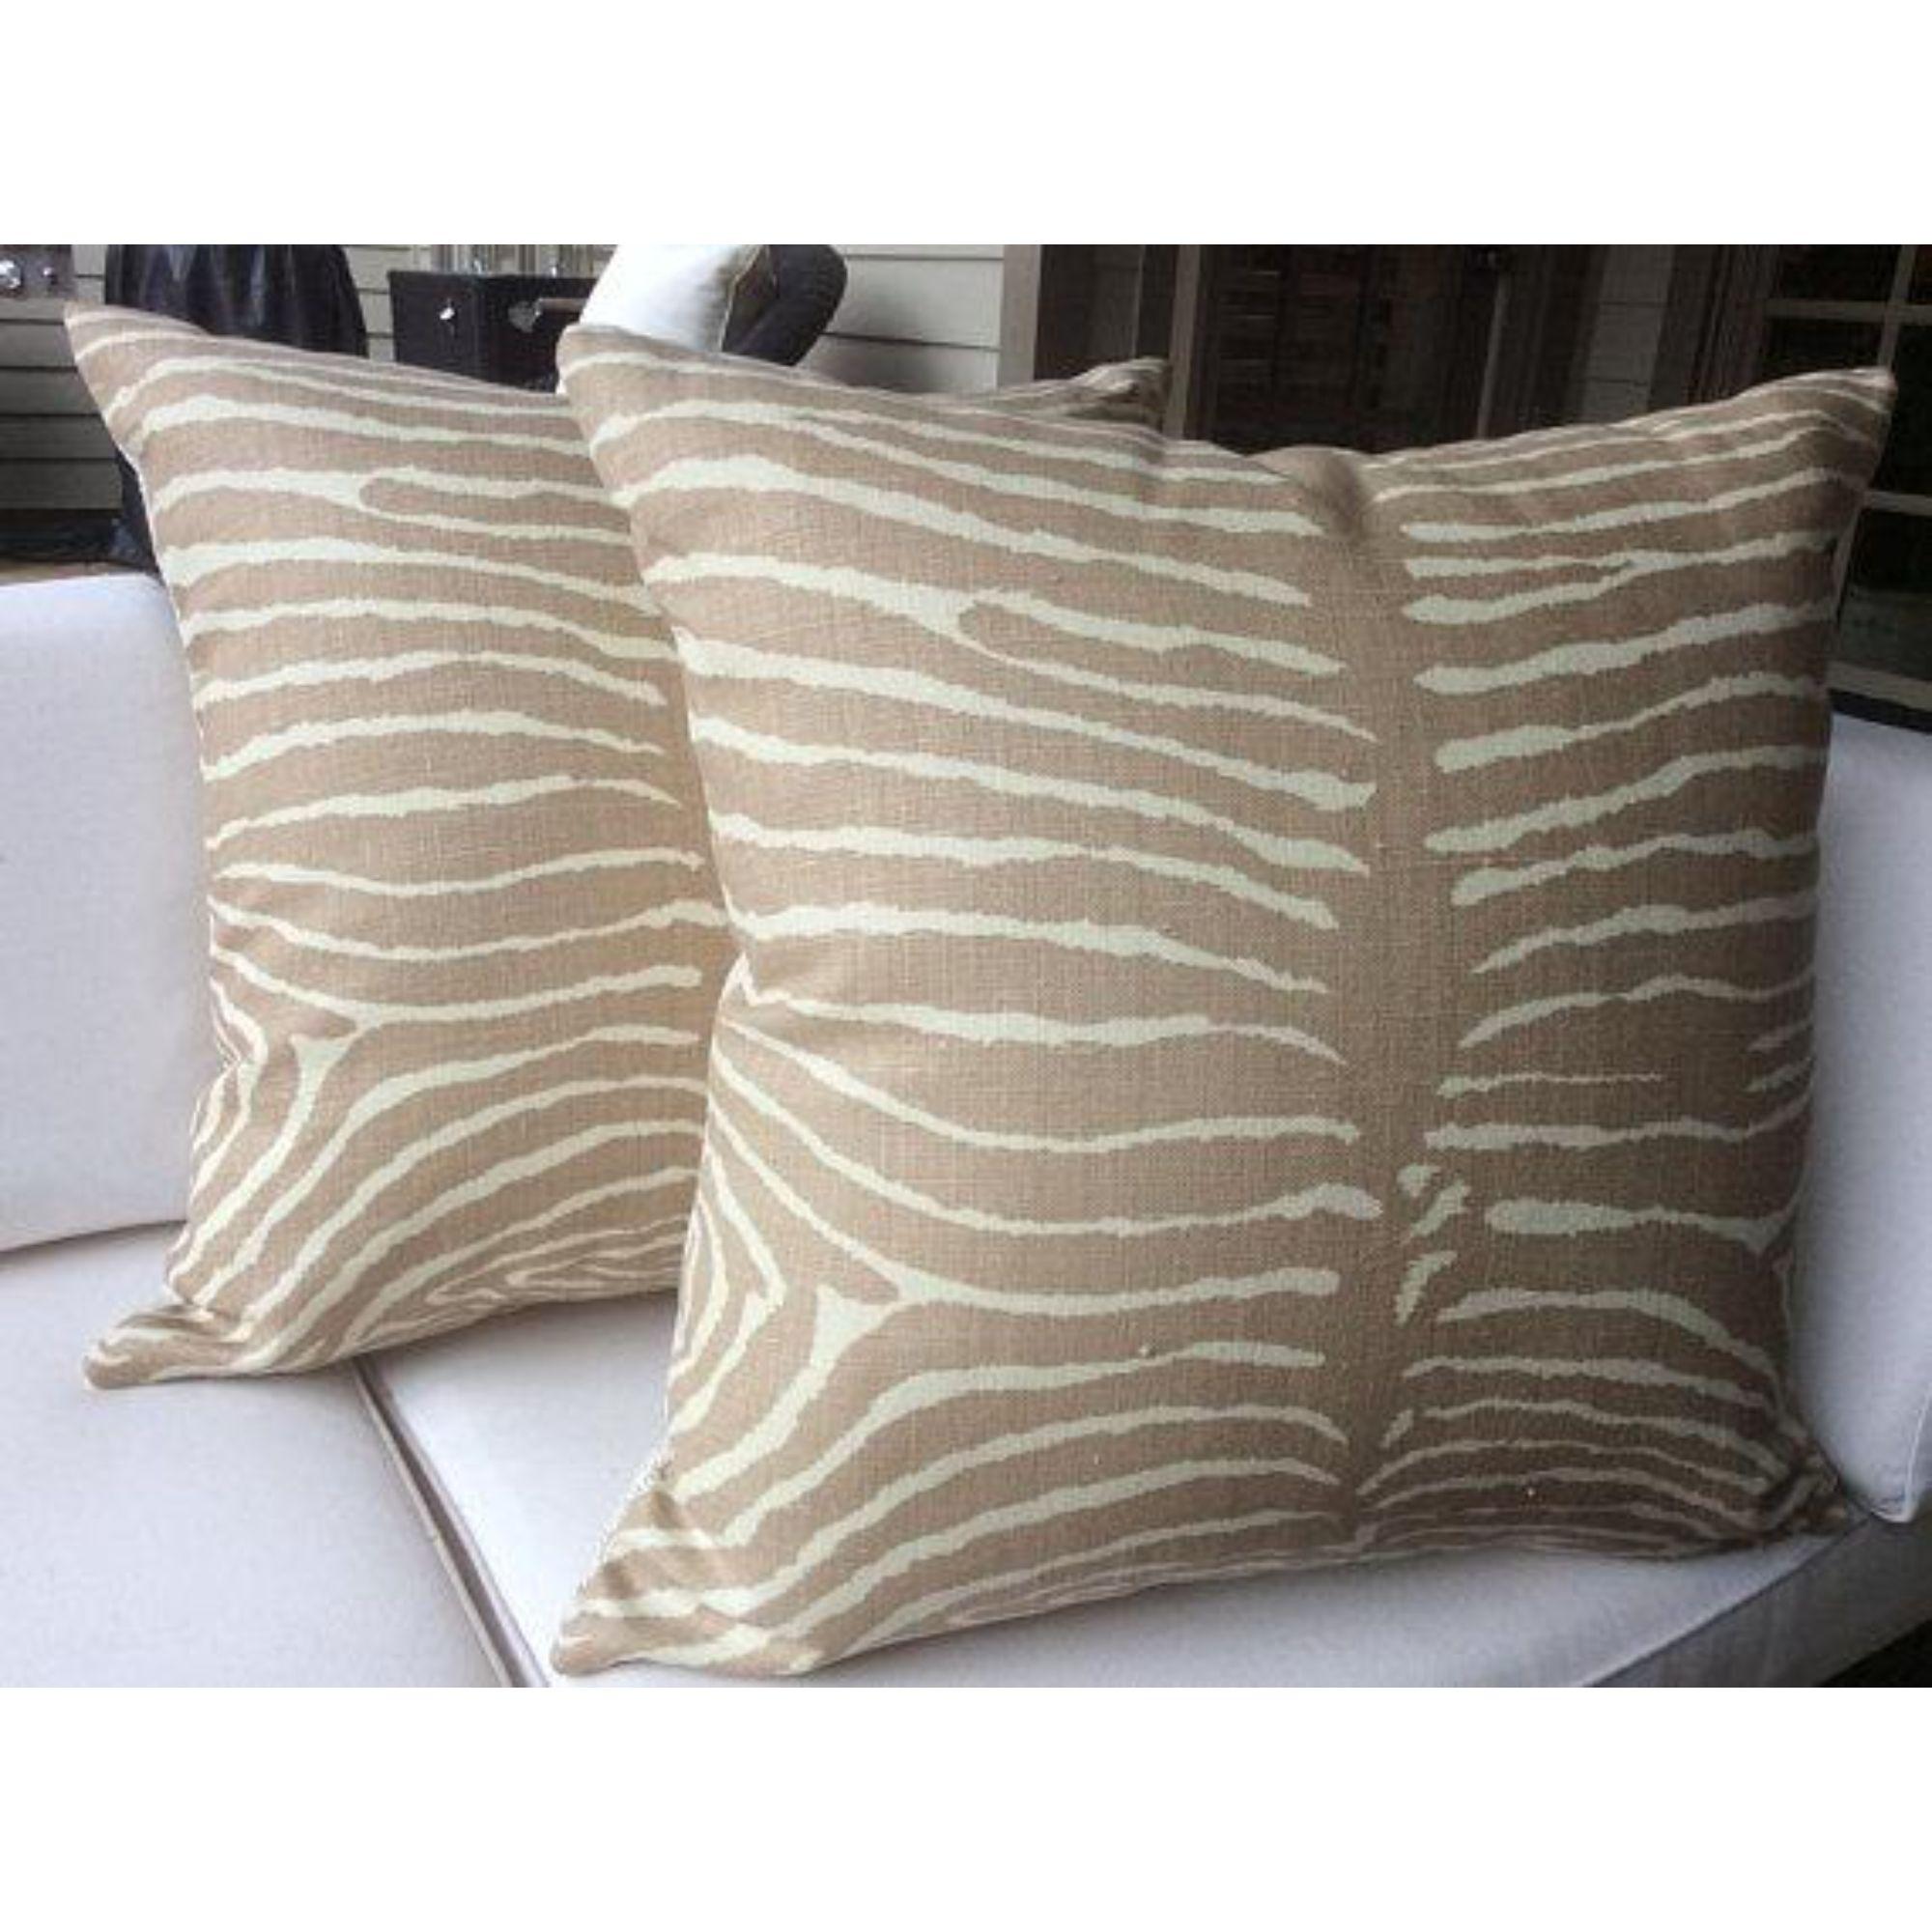 American Brunschwig and Fils “Pewter” Le Zebre Tan Pillows - a Pair For Sale